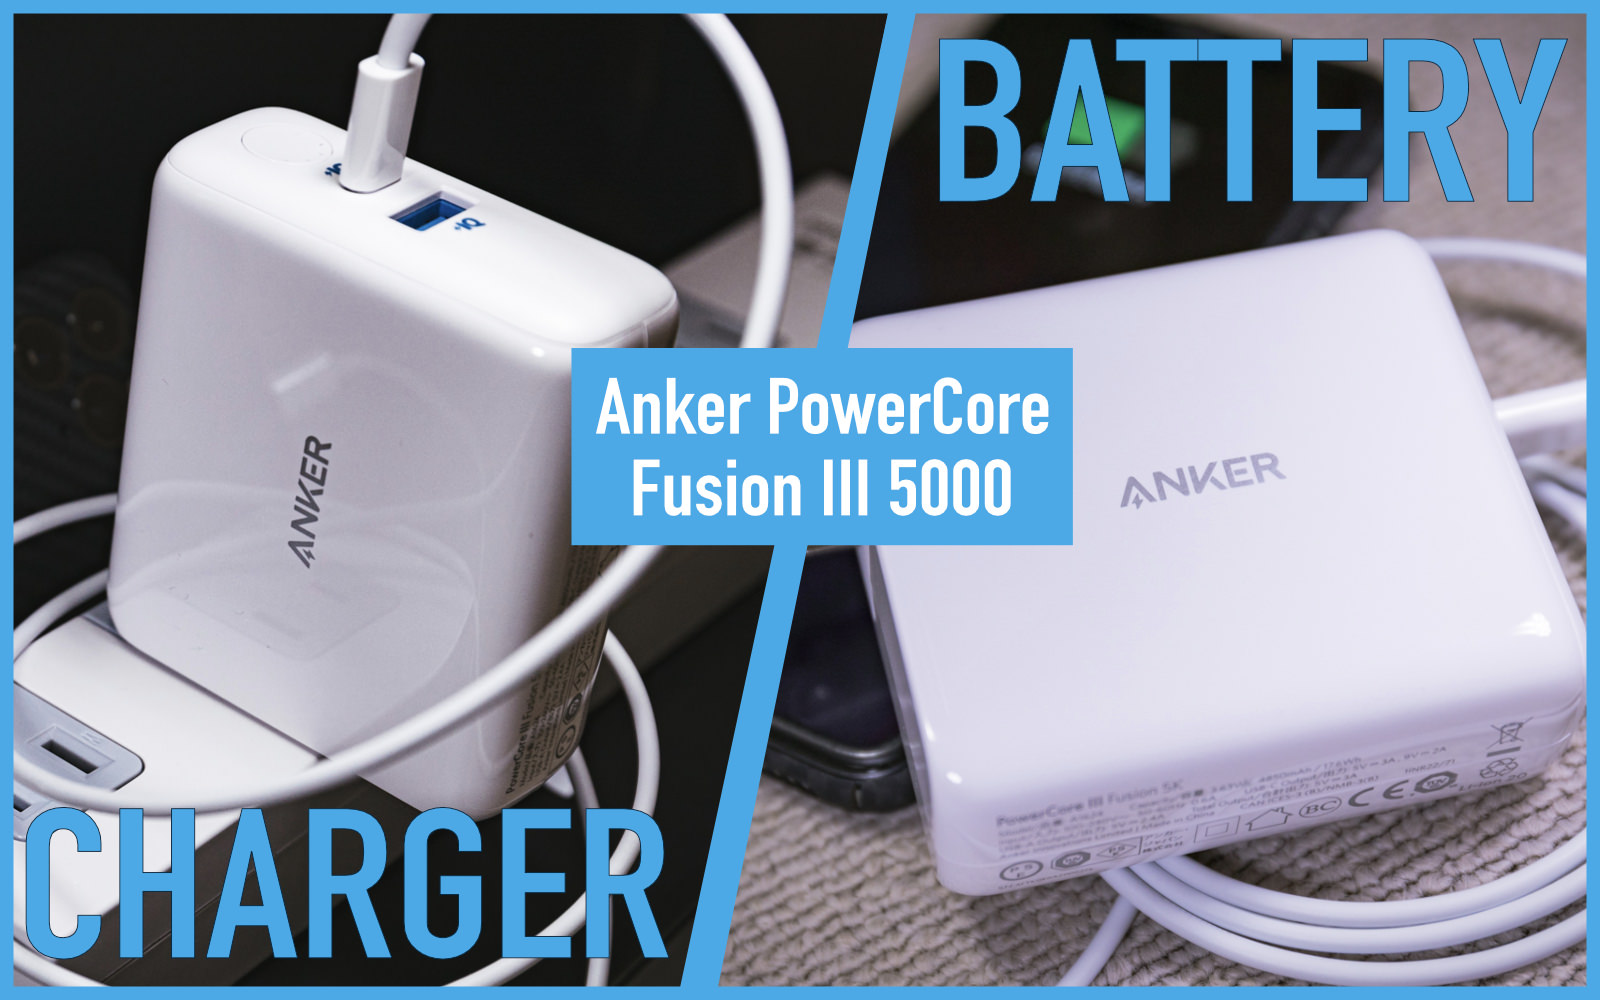 Anker PowerCore Fusion 3 5000 Review